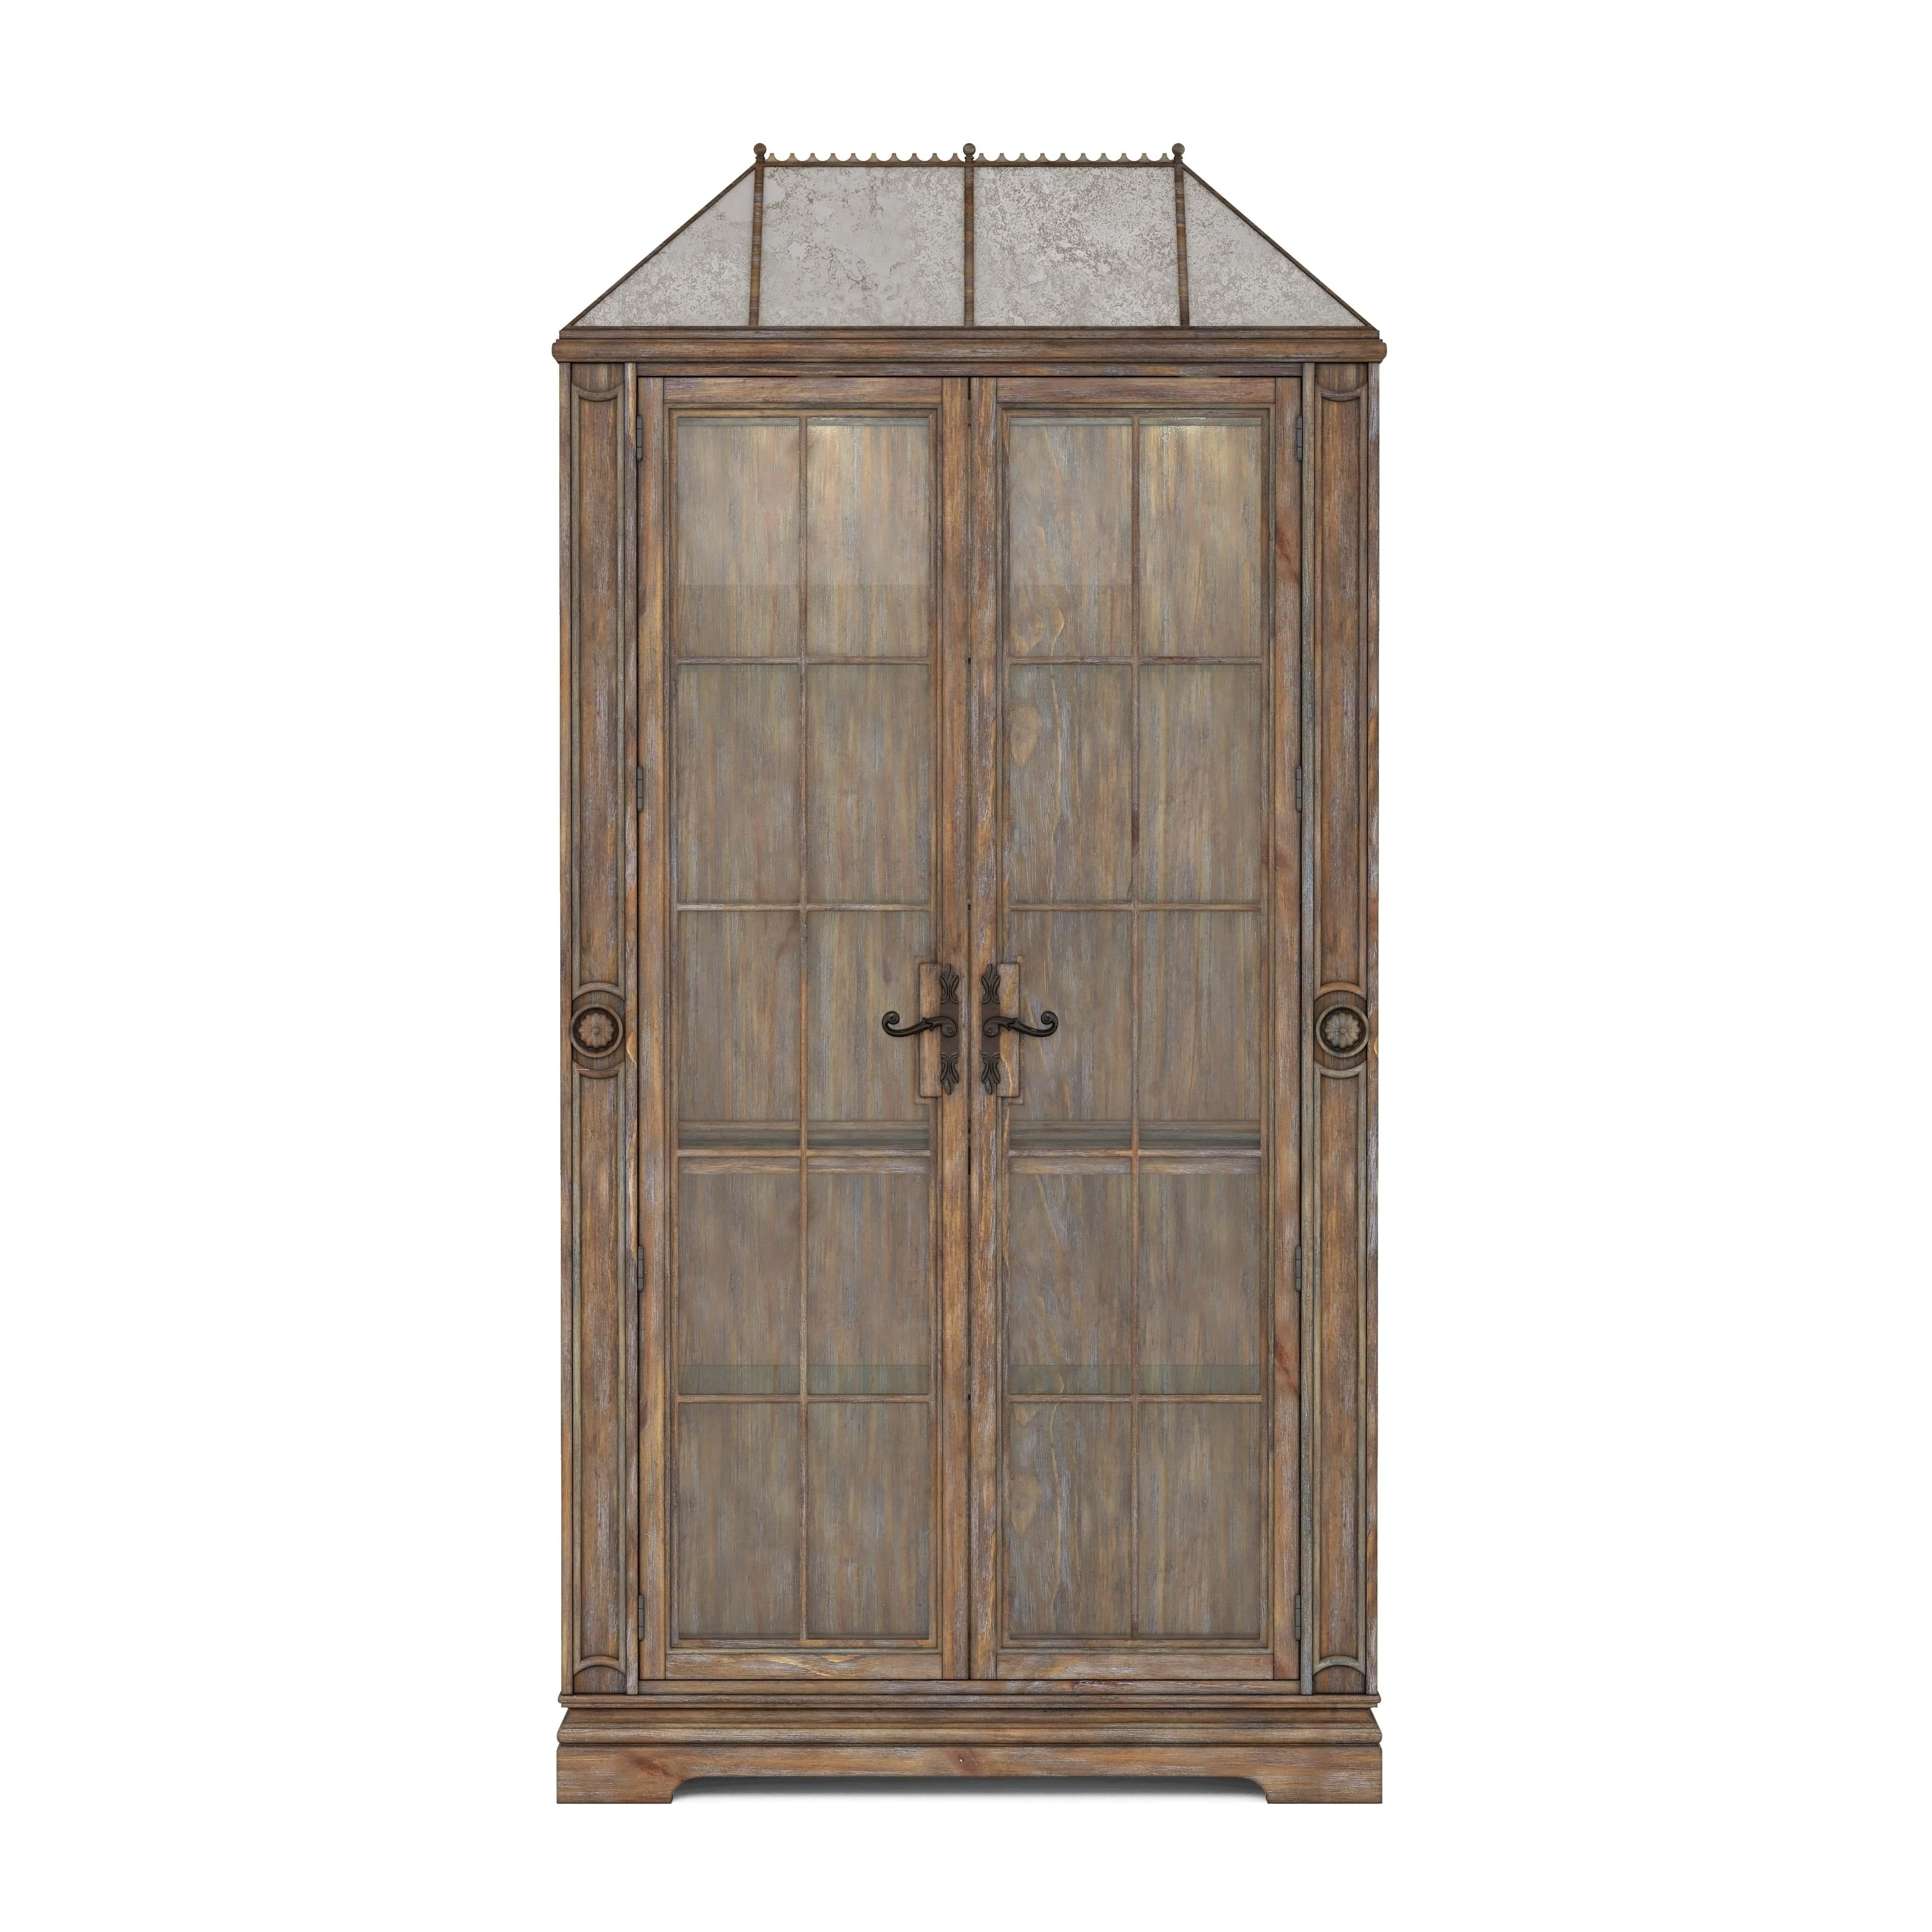 Traditional, Farmhouse China Cabinet Architrave 277240-2608 in Brown 